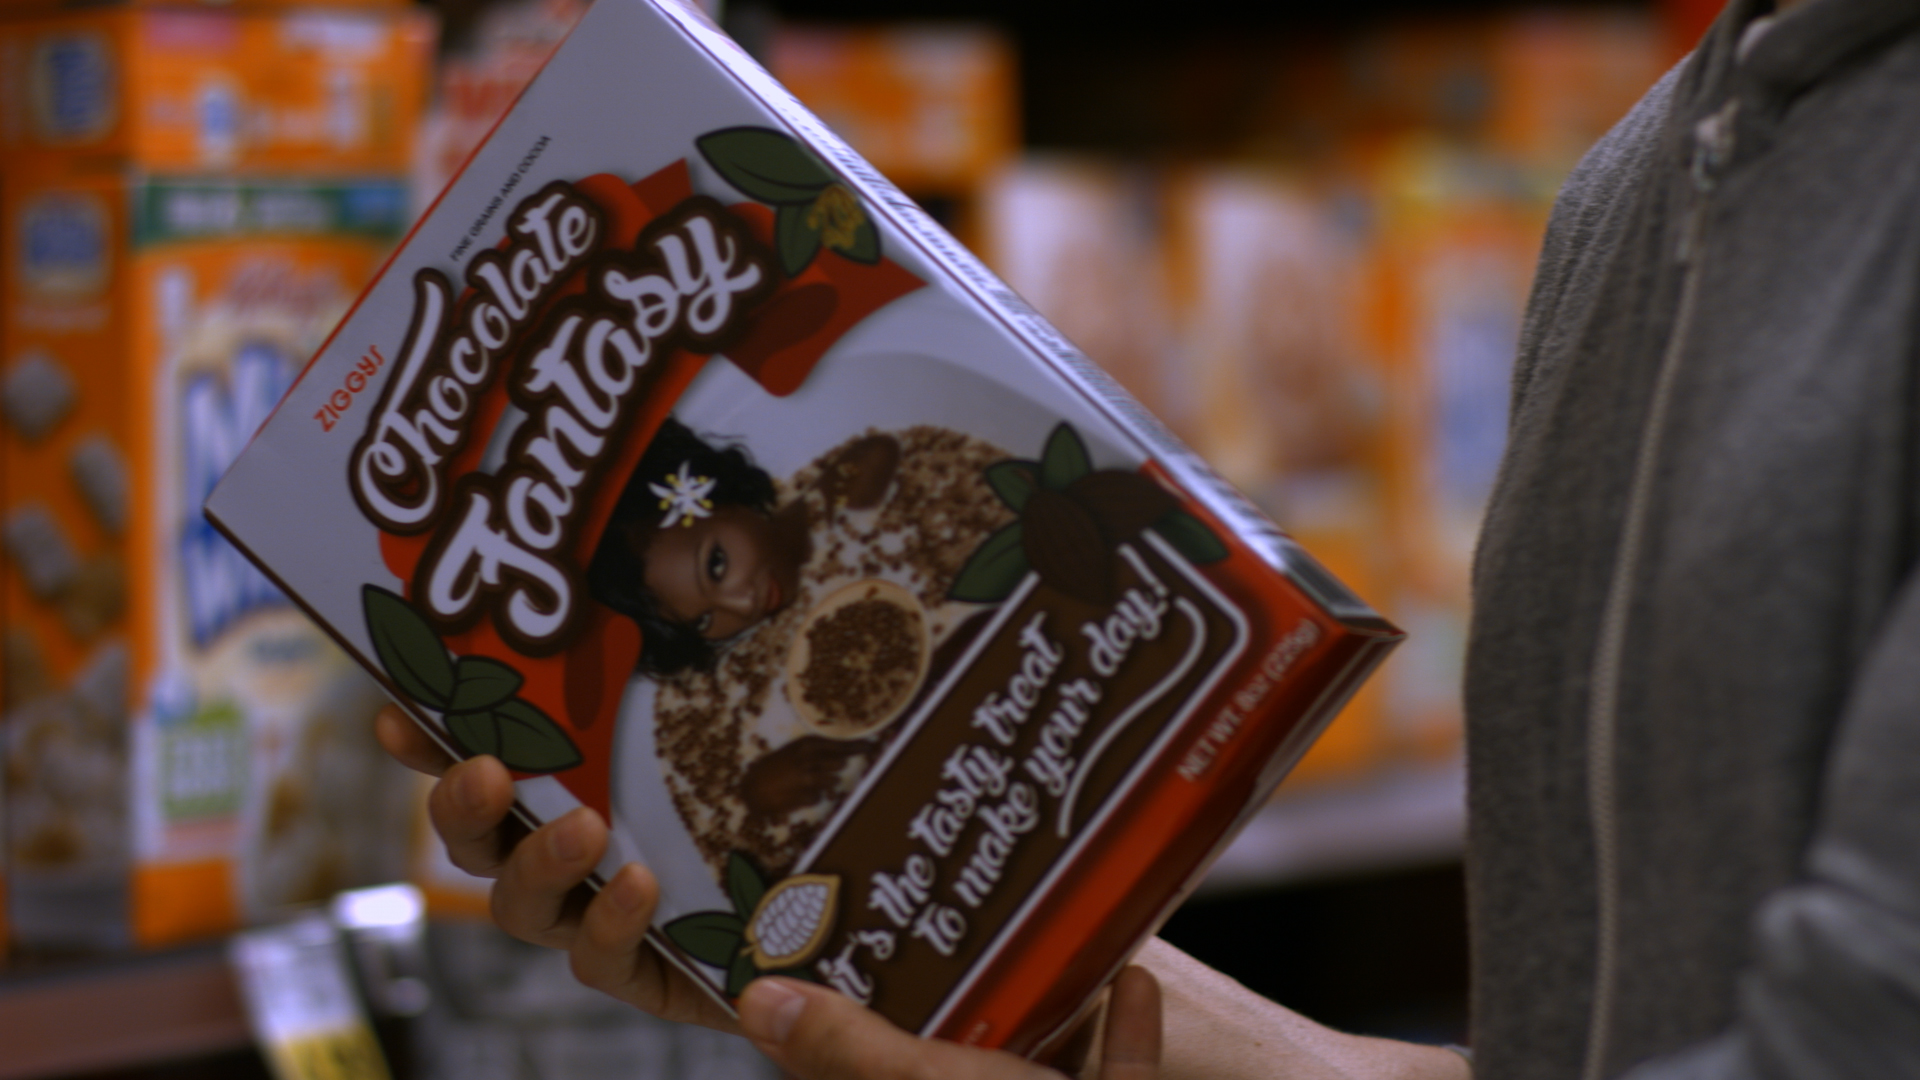 Scene from A Bitter Lime (2014) featuring cereal box design by Russell Southam.